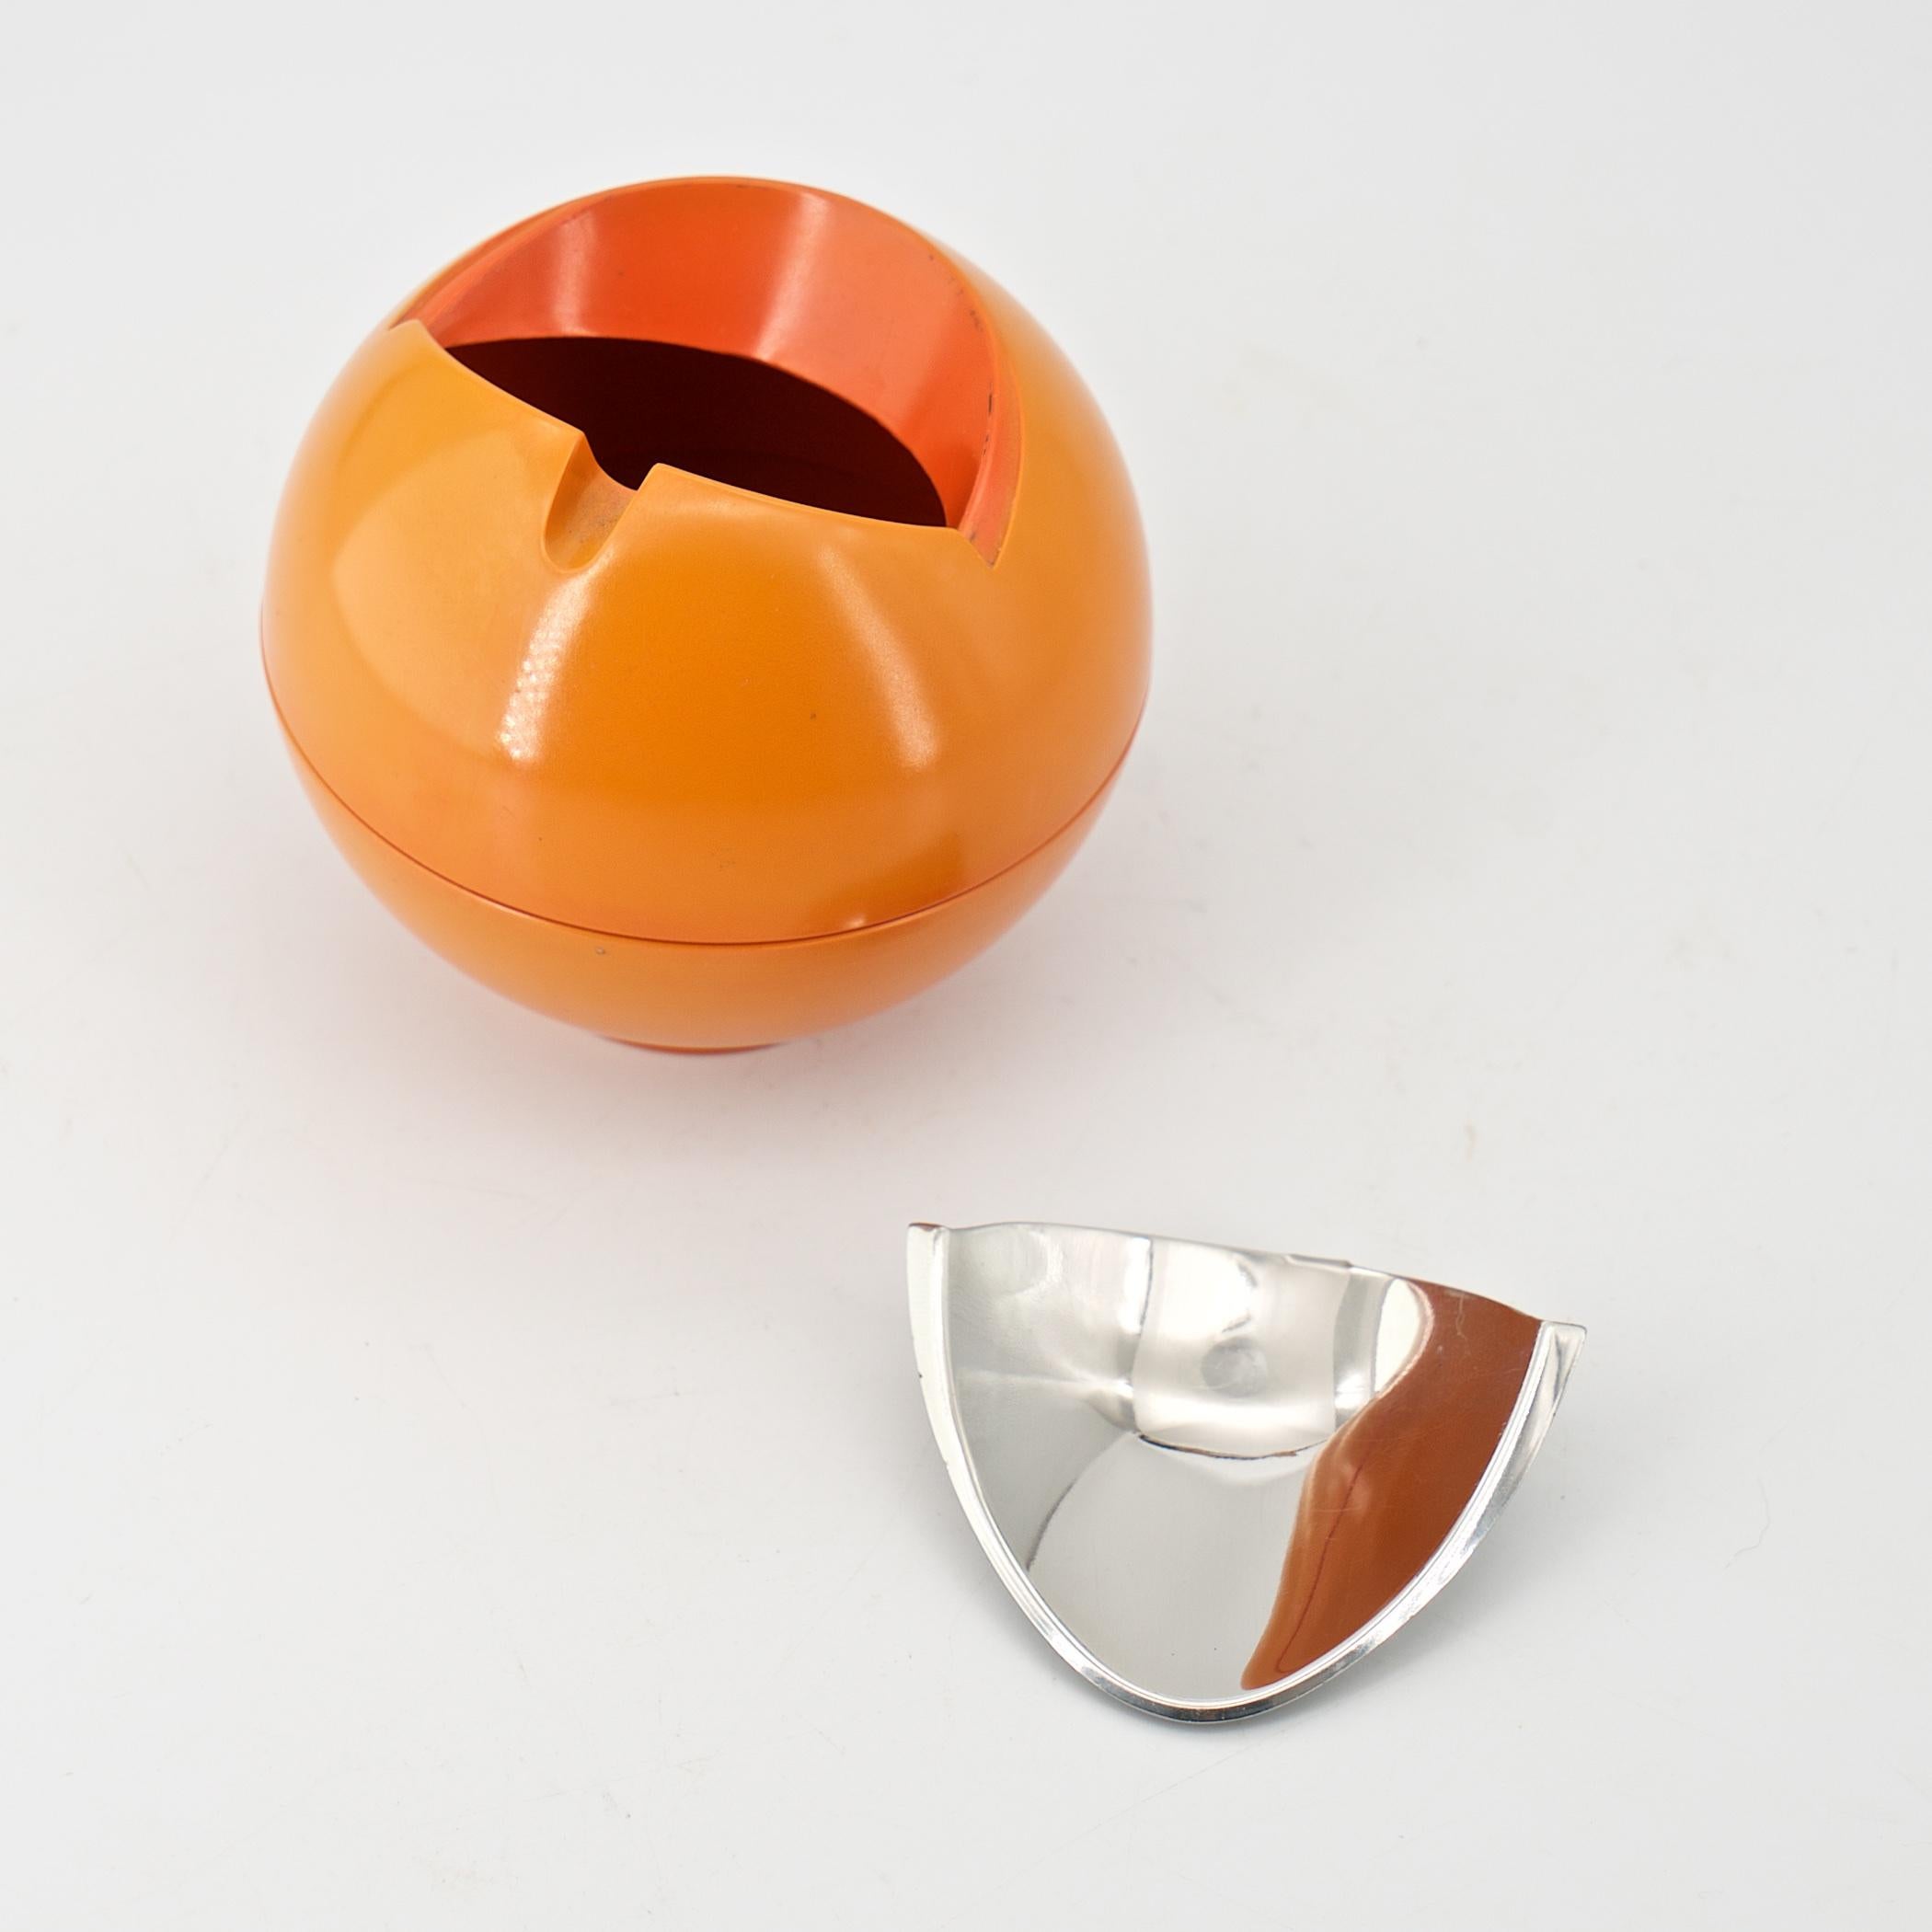 Stainless Steel 1960s Orb Ashtray Mod Psychedelic Orange Mid-Century Plastic + Steel Sculpture For Sale